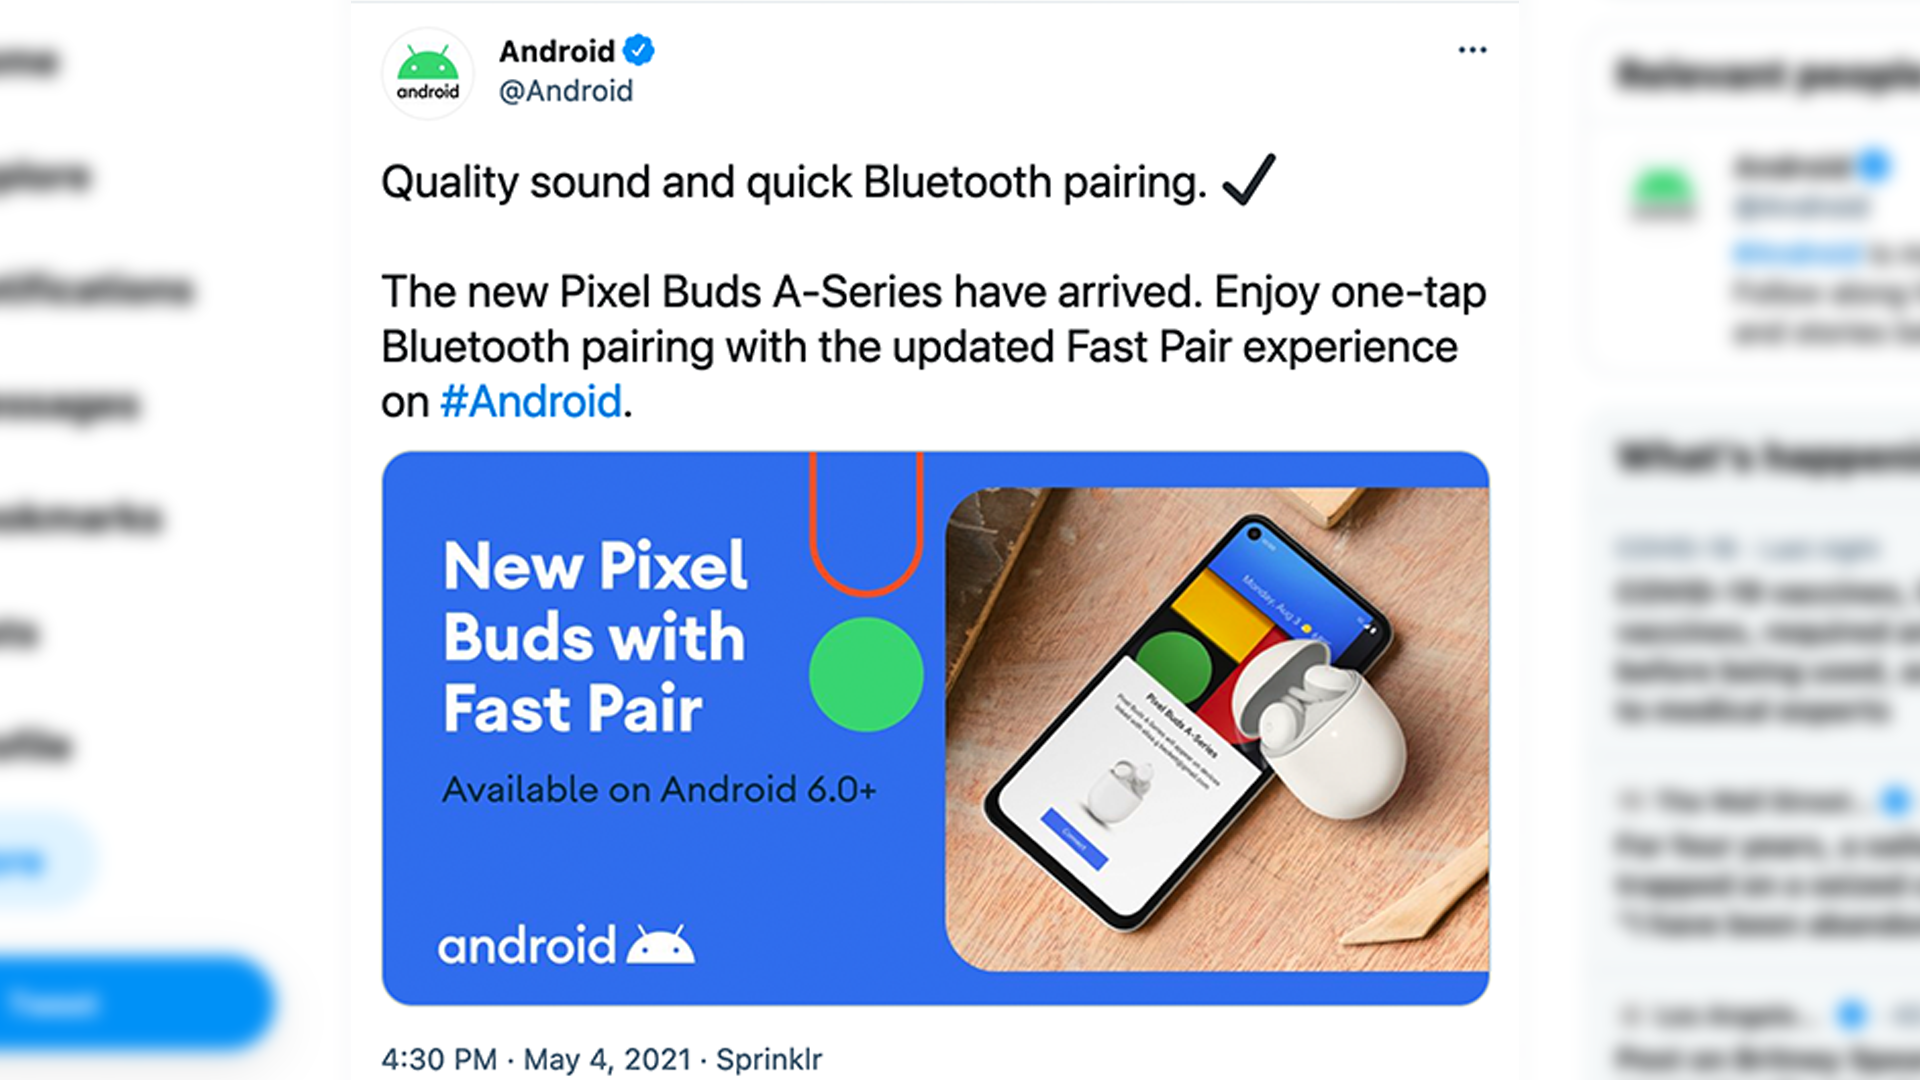 Google By chance Announced the Pixel Buds A-Series on Twitter